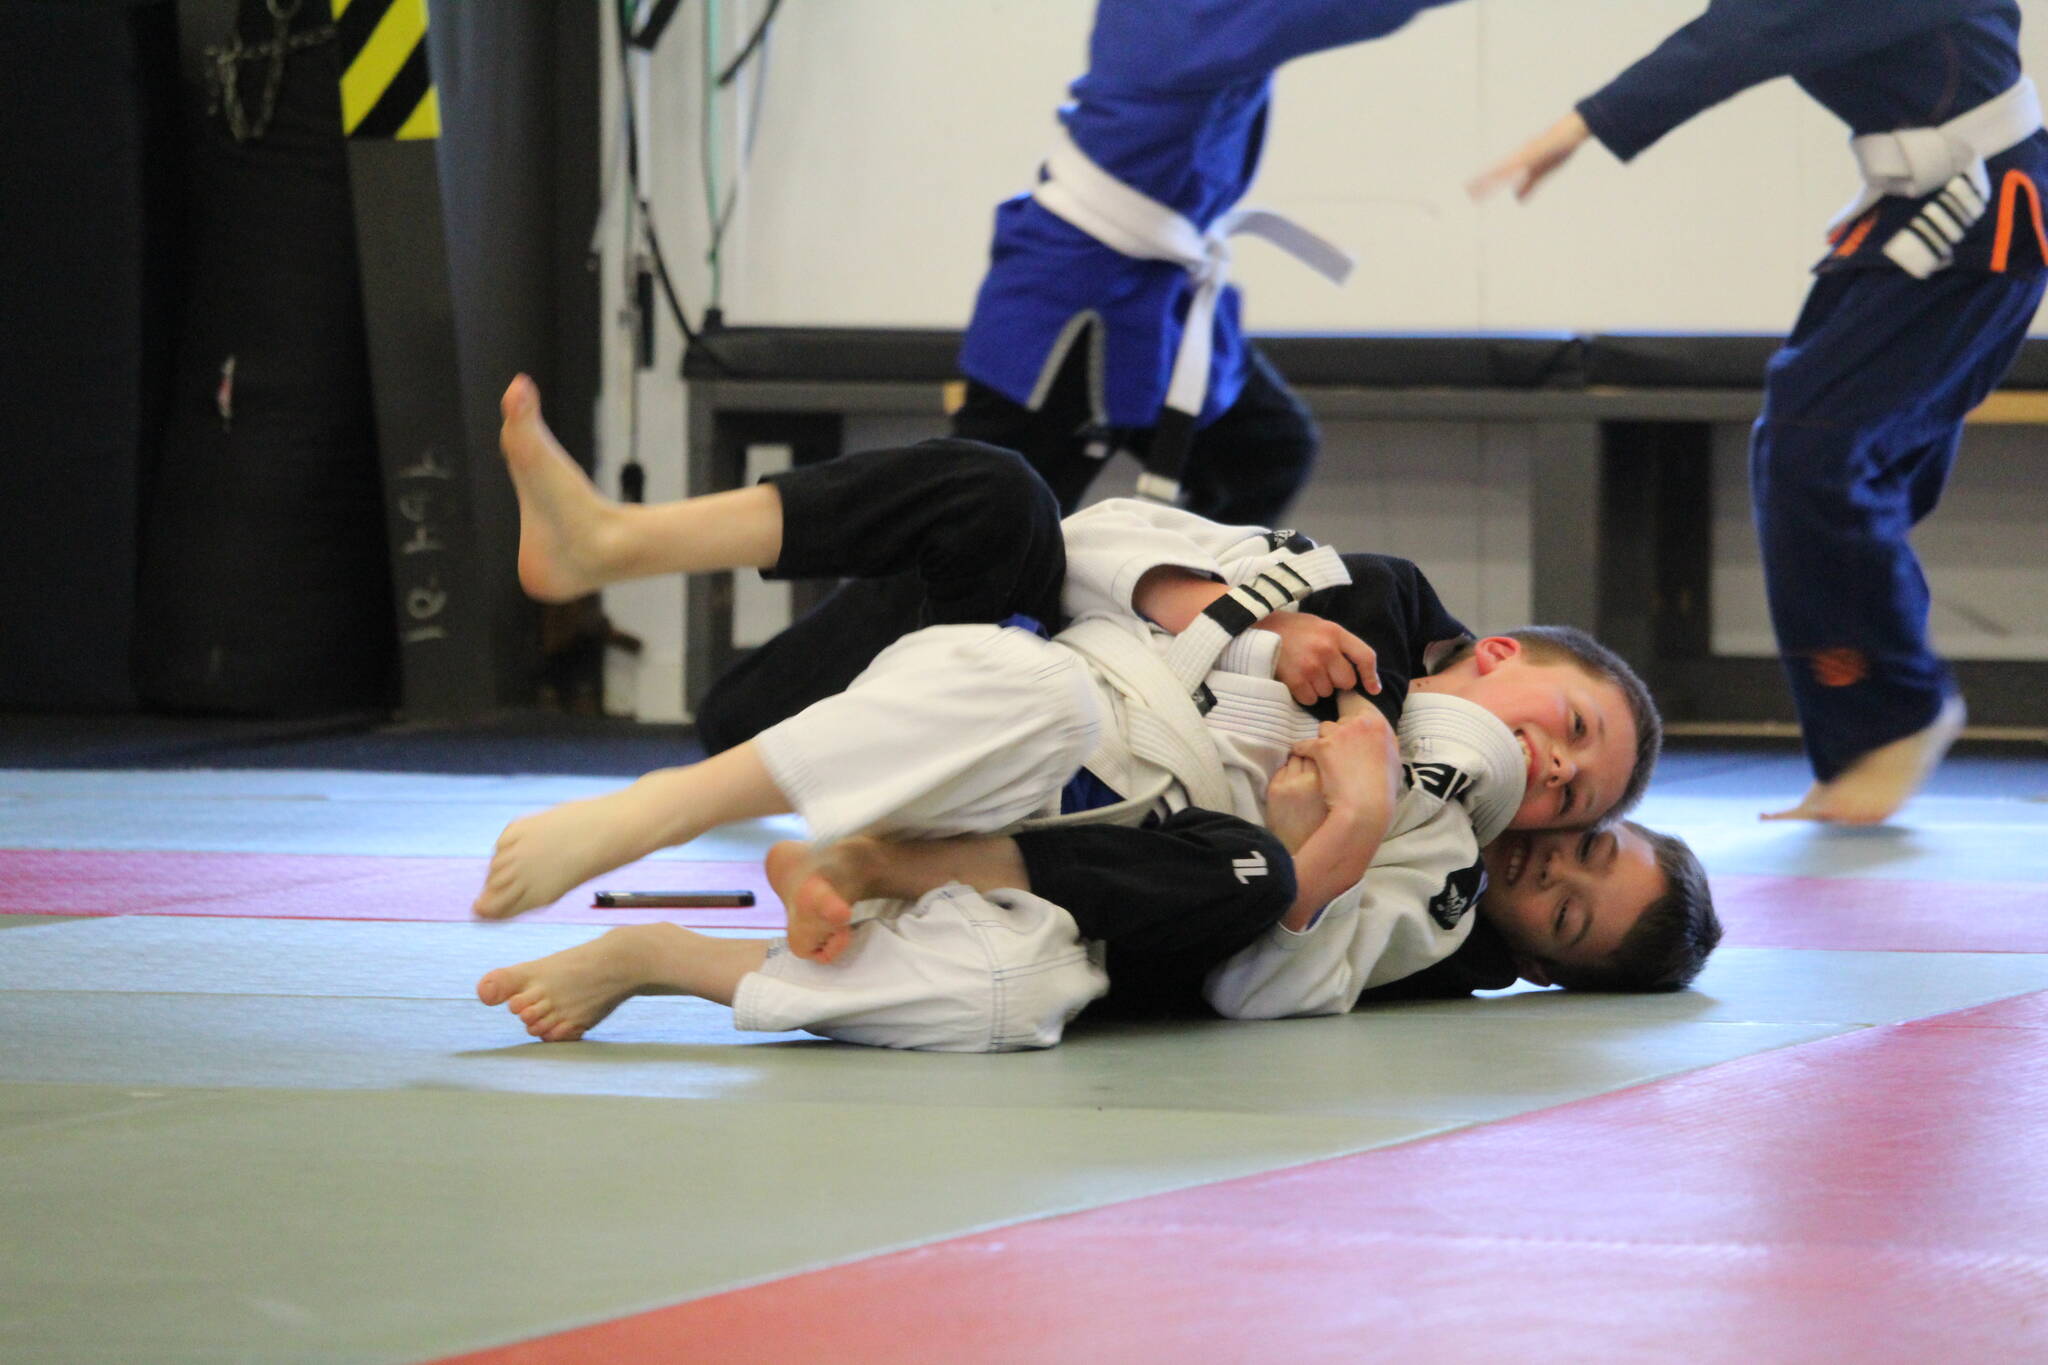 Photo by Karina Andrew/Whidbey News-Times
Ryan Zimmerman, front, practices with Eli Williams in the kids’ Jiu Jitsu class.